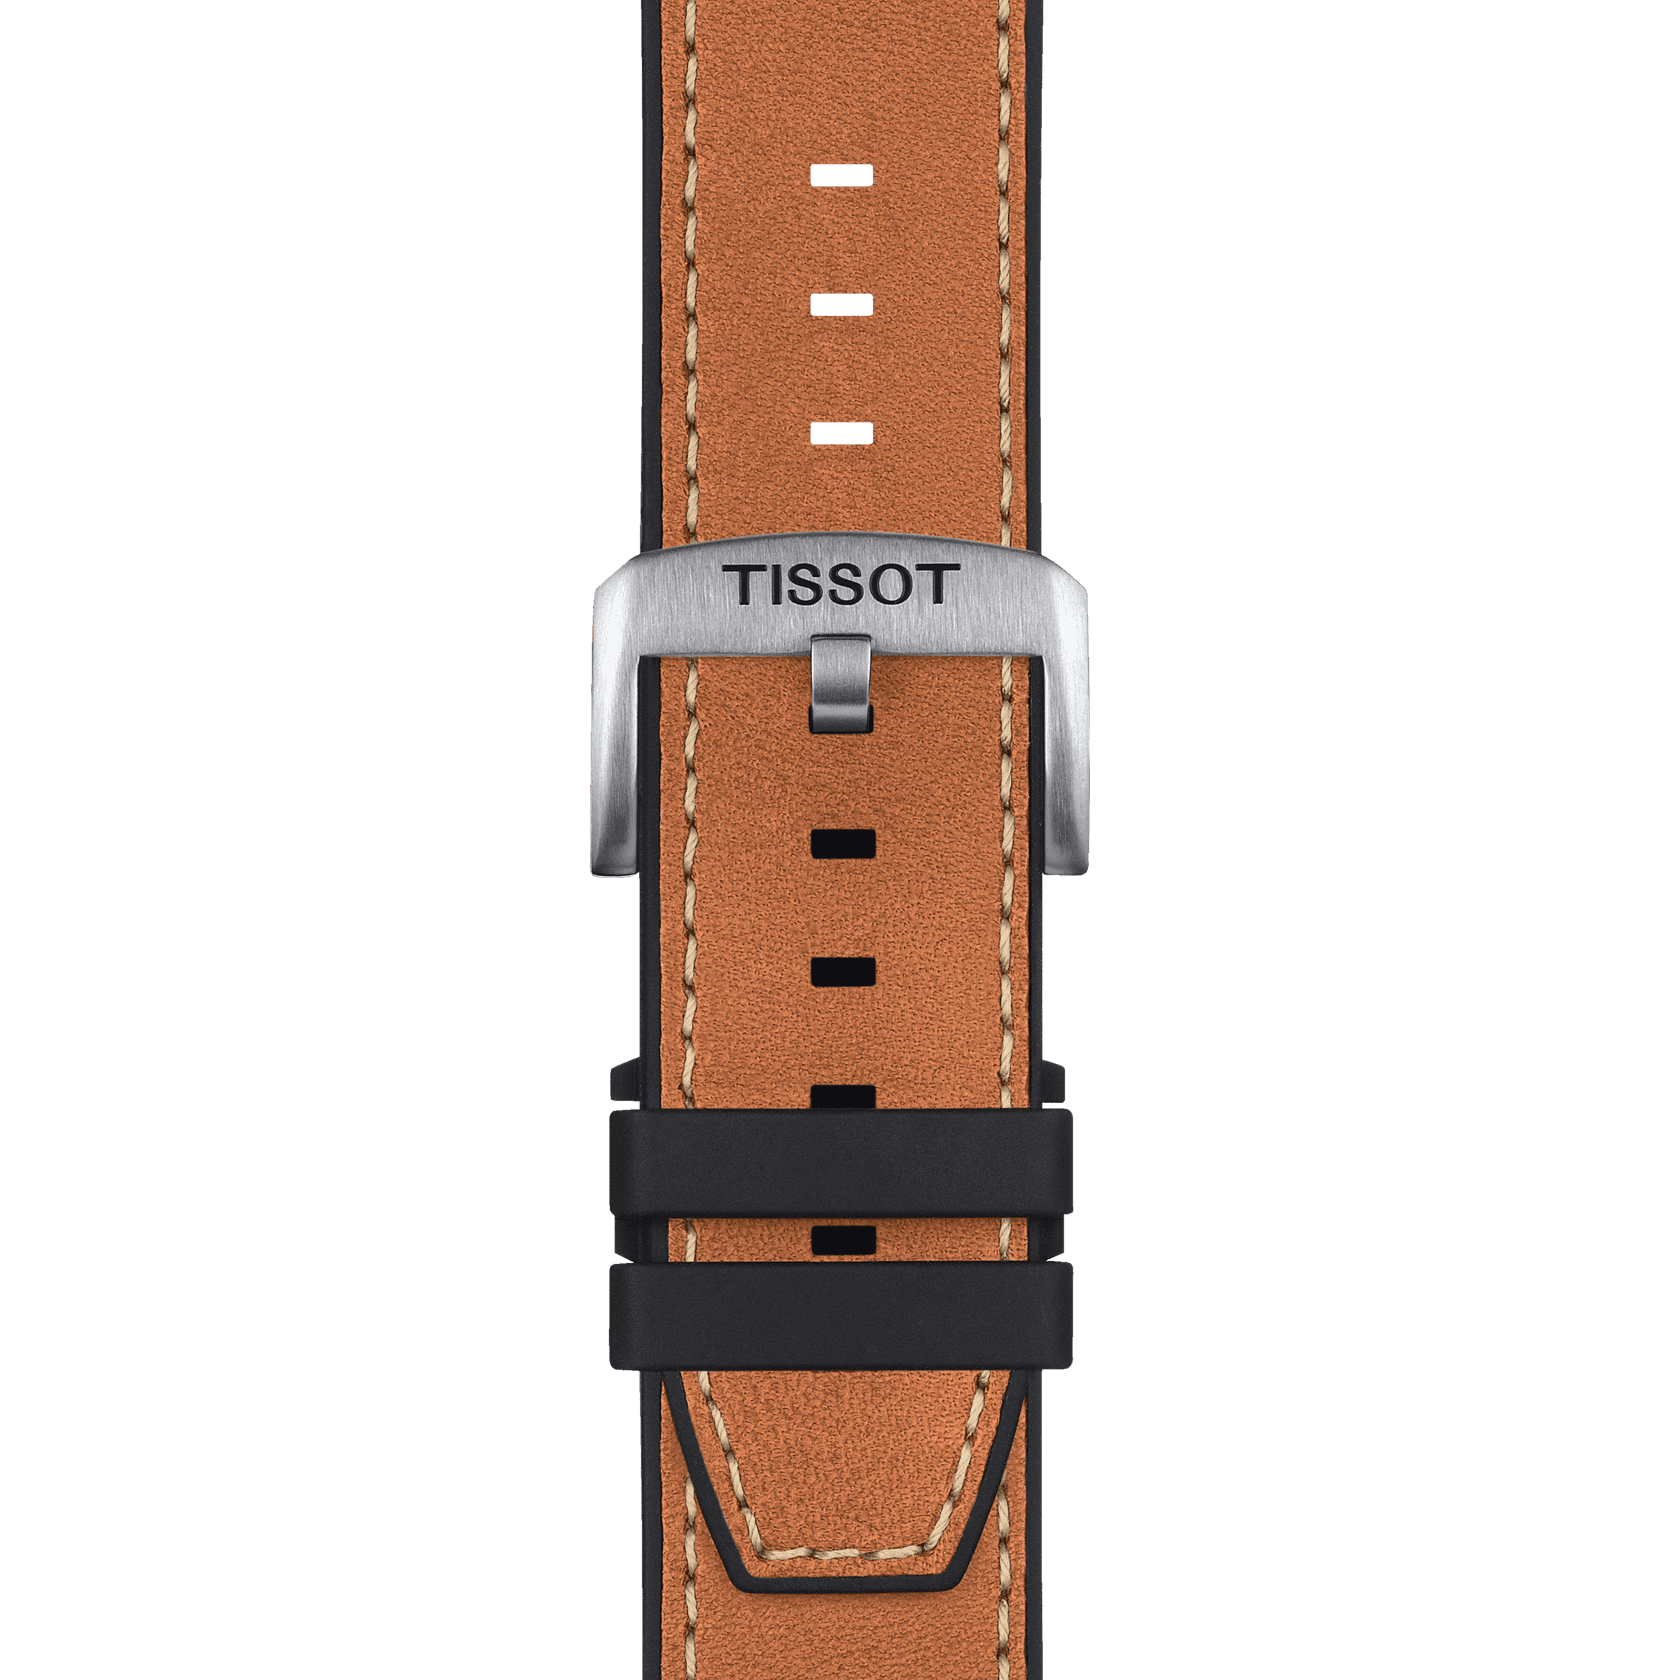 Tissot official brown leather strap lugs 23 mm